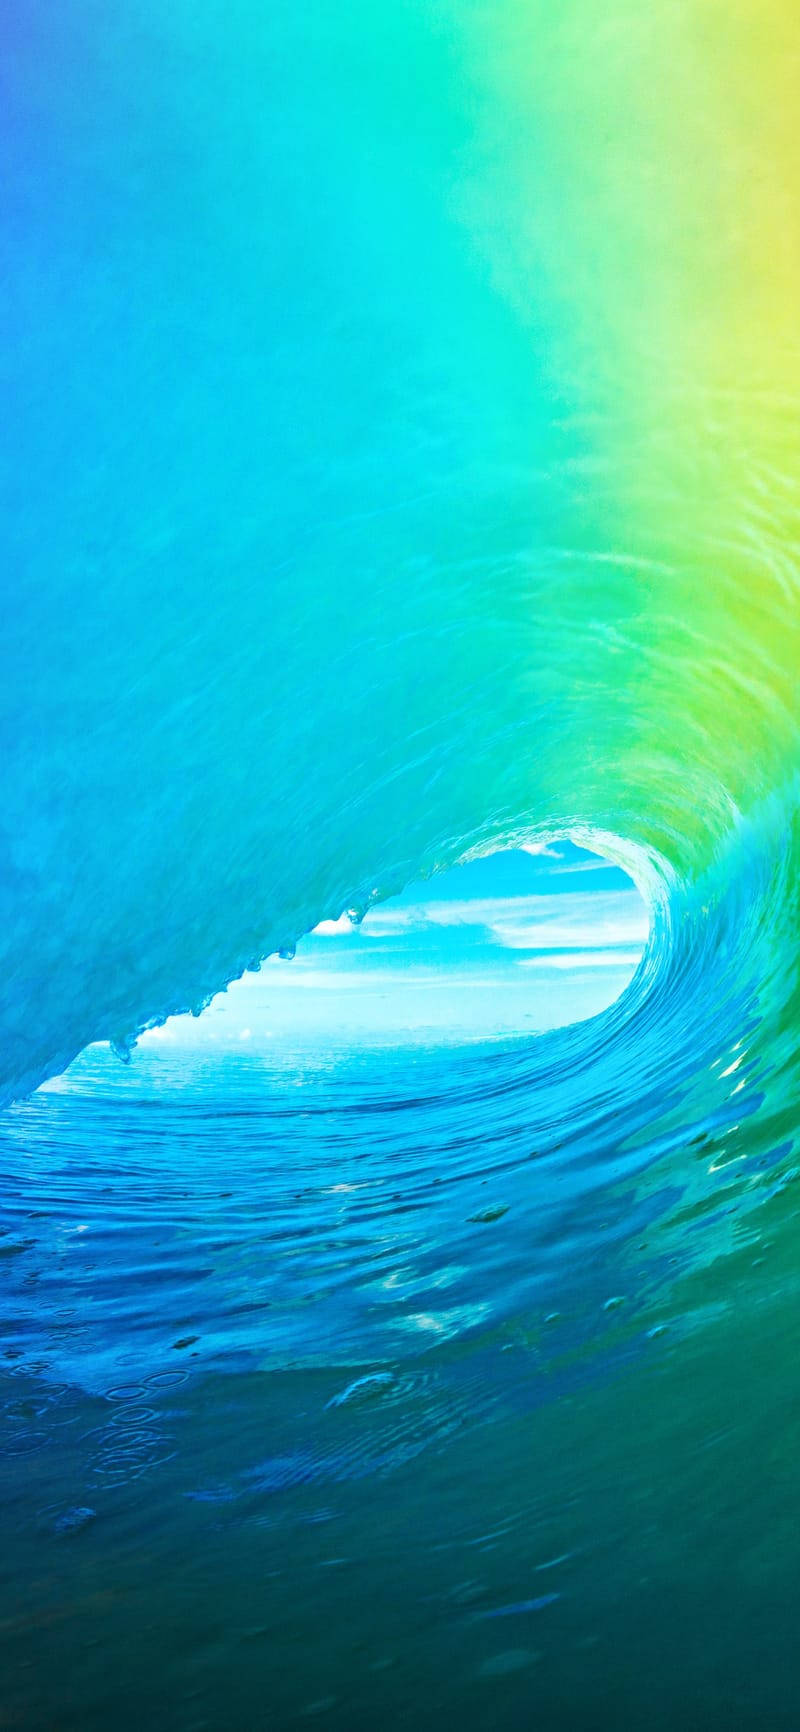 Wave Surfing Colorful Iphone 5s Wallpaper